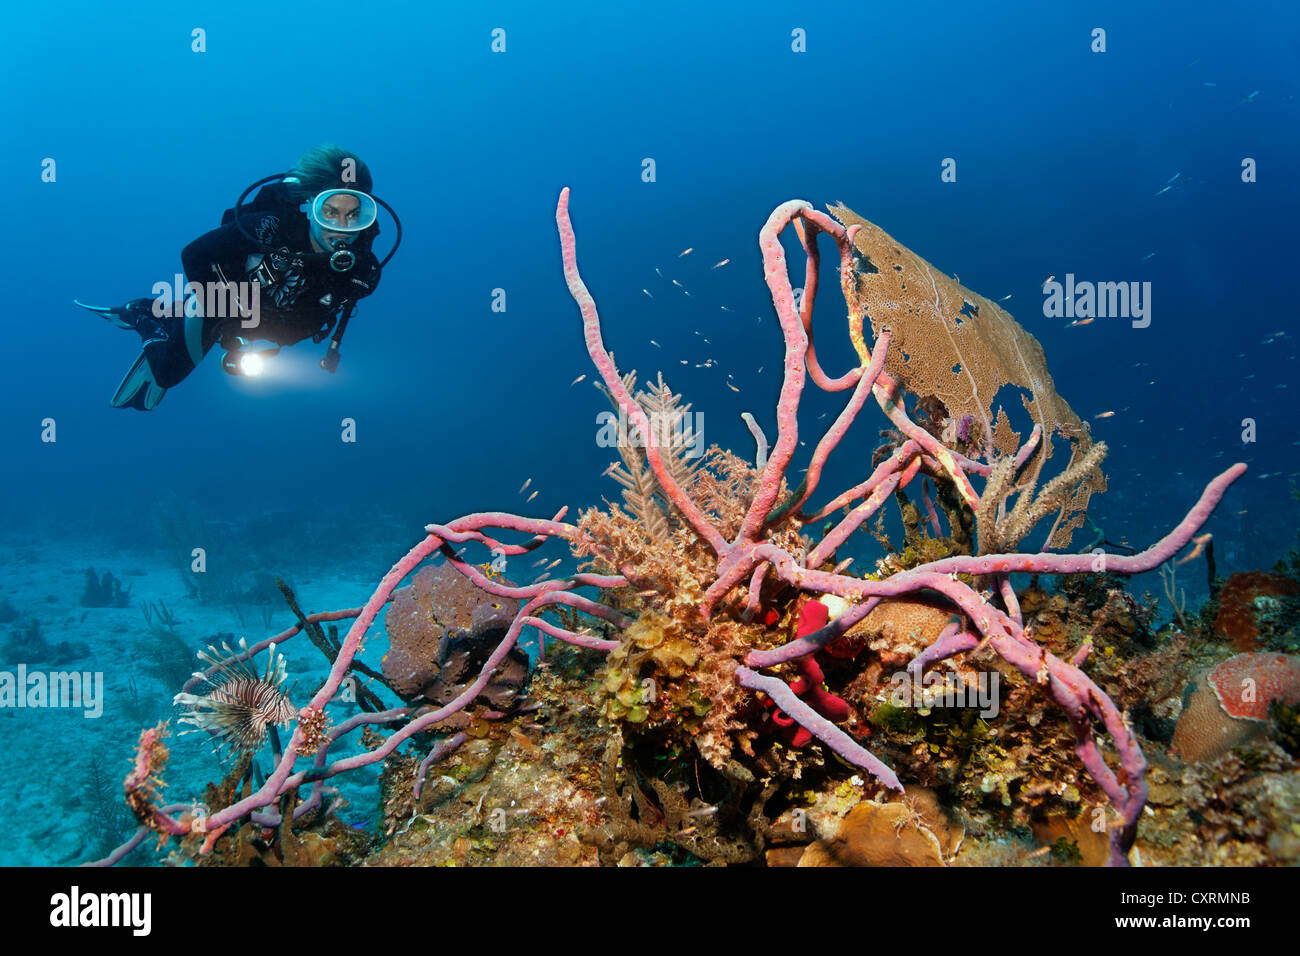 Scuba diver looking at coral reef with a variety of coral species and Row Pore Rope Sponge (Aplysina cauliformis) Stock Photo